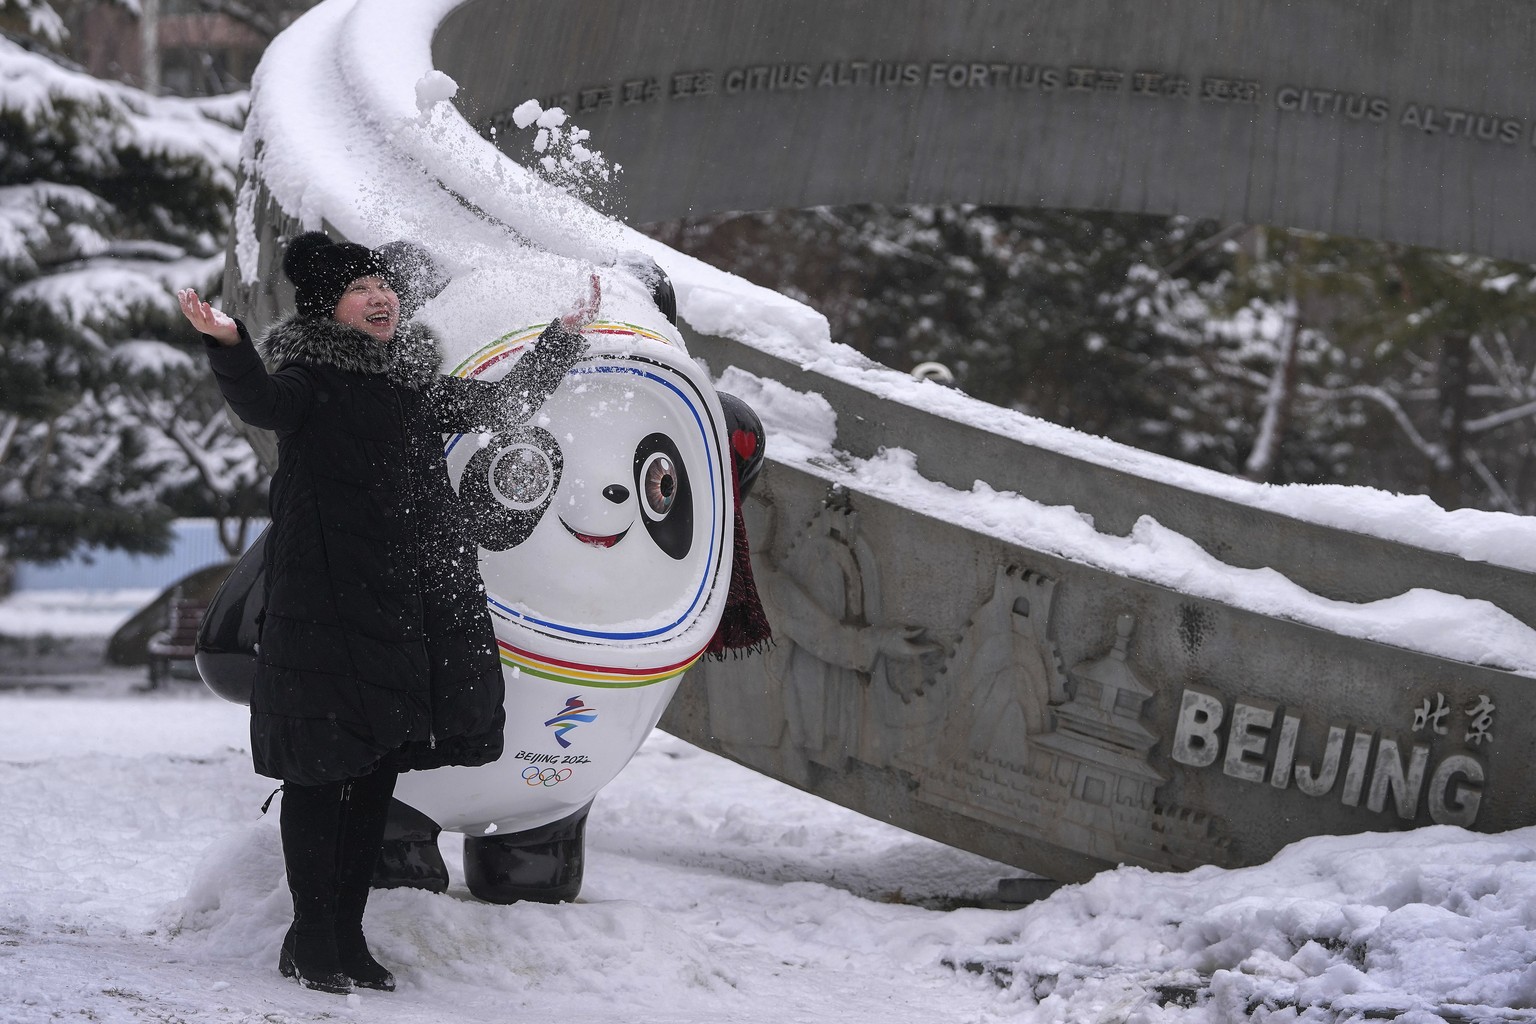 A woman throws snow near the Bing Dwen Dwen, the Beijing Winter Olympics mascot, on display at an Olympics monument during a snow fall in Beijing, Sunday, Feb. 13, 2022. (AP Photo/Andy Wong)